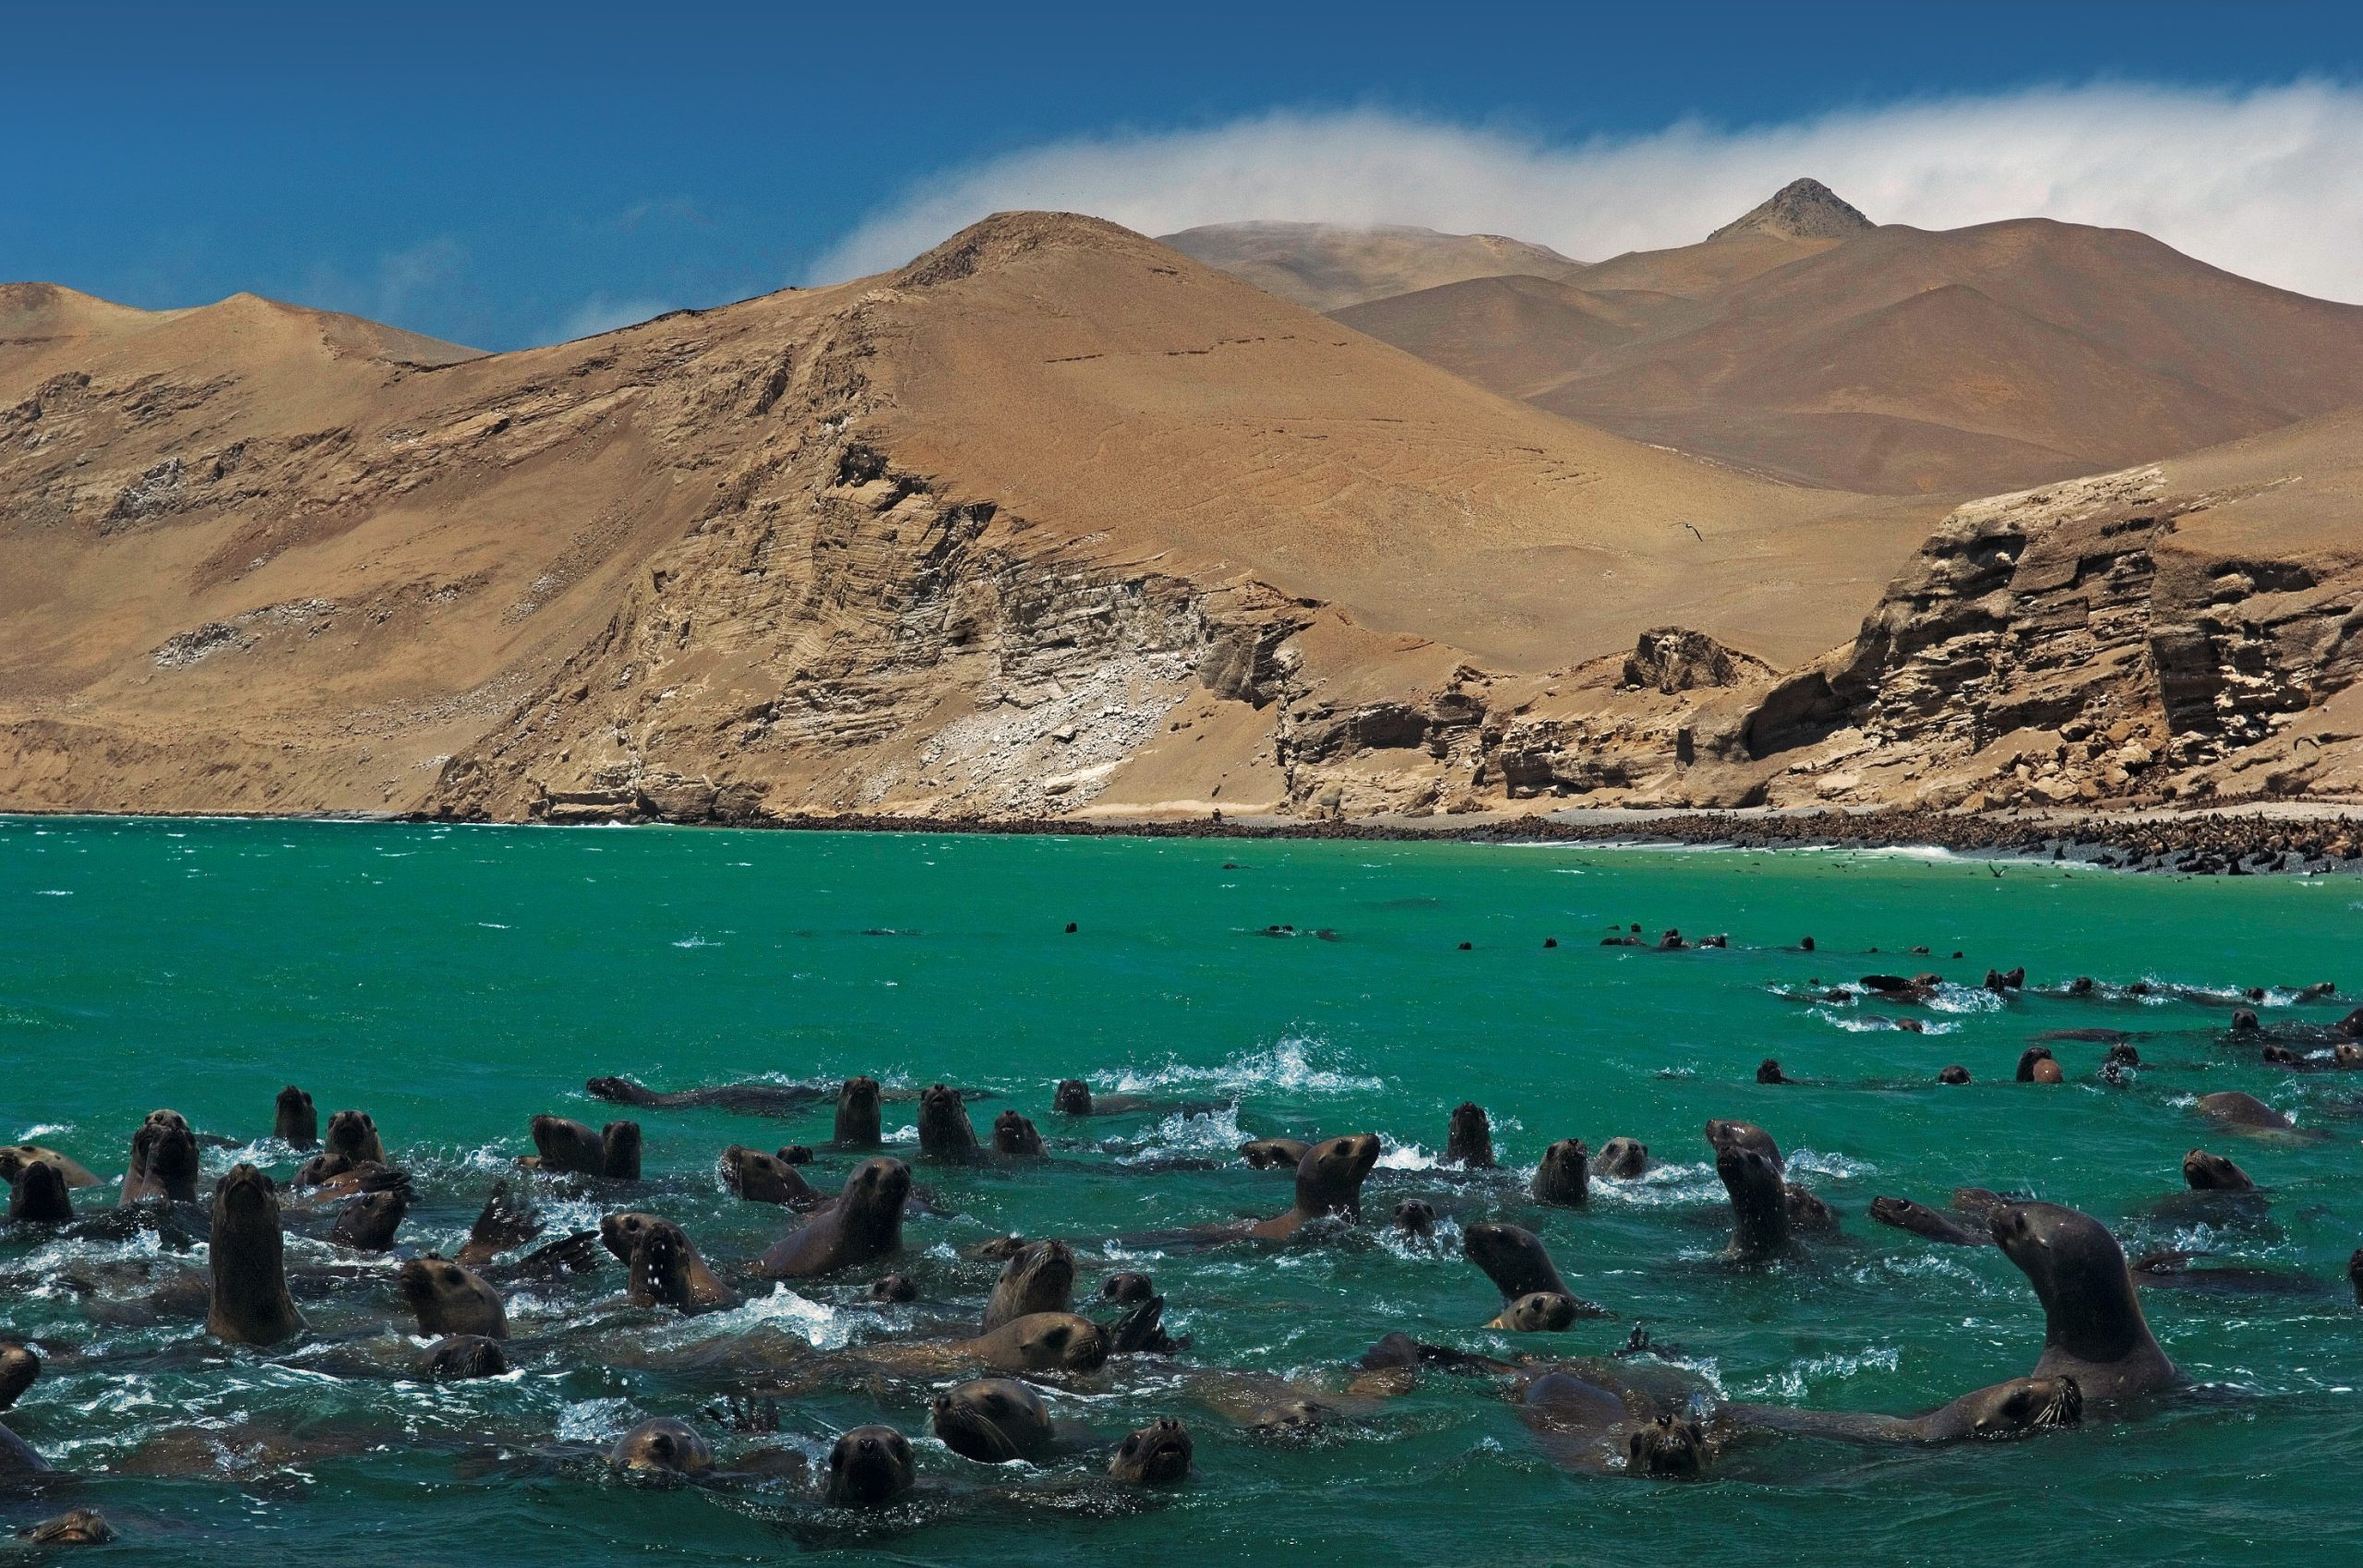  Sea lions on one of the shores of the Paracas National Reserve.